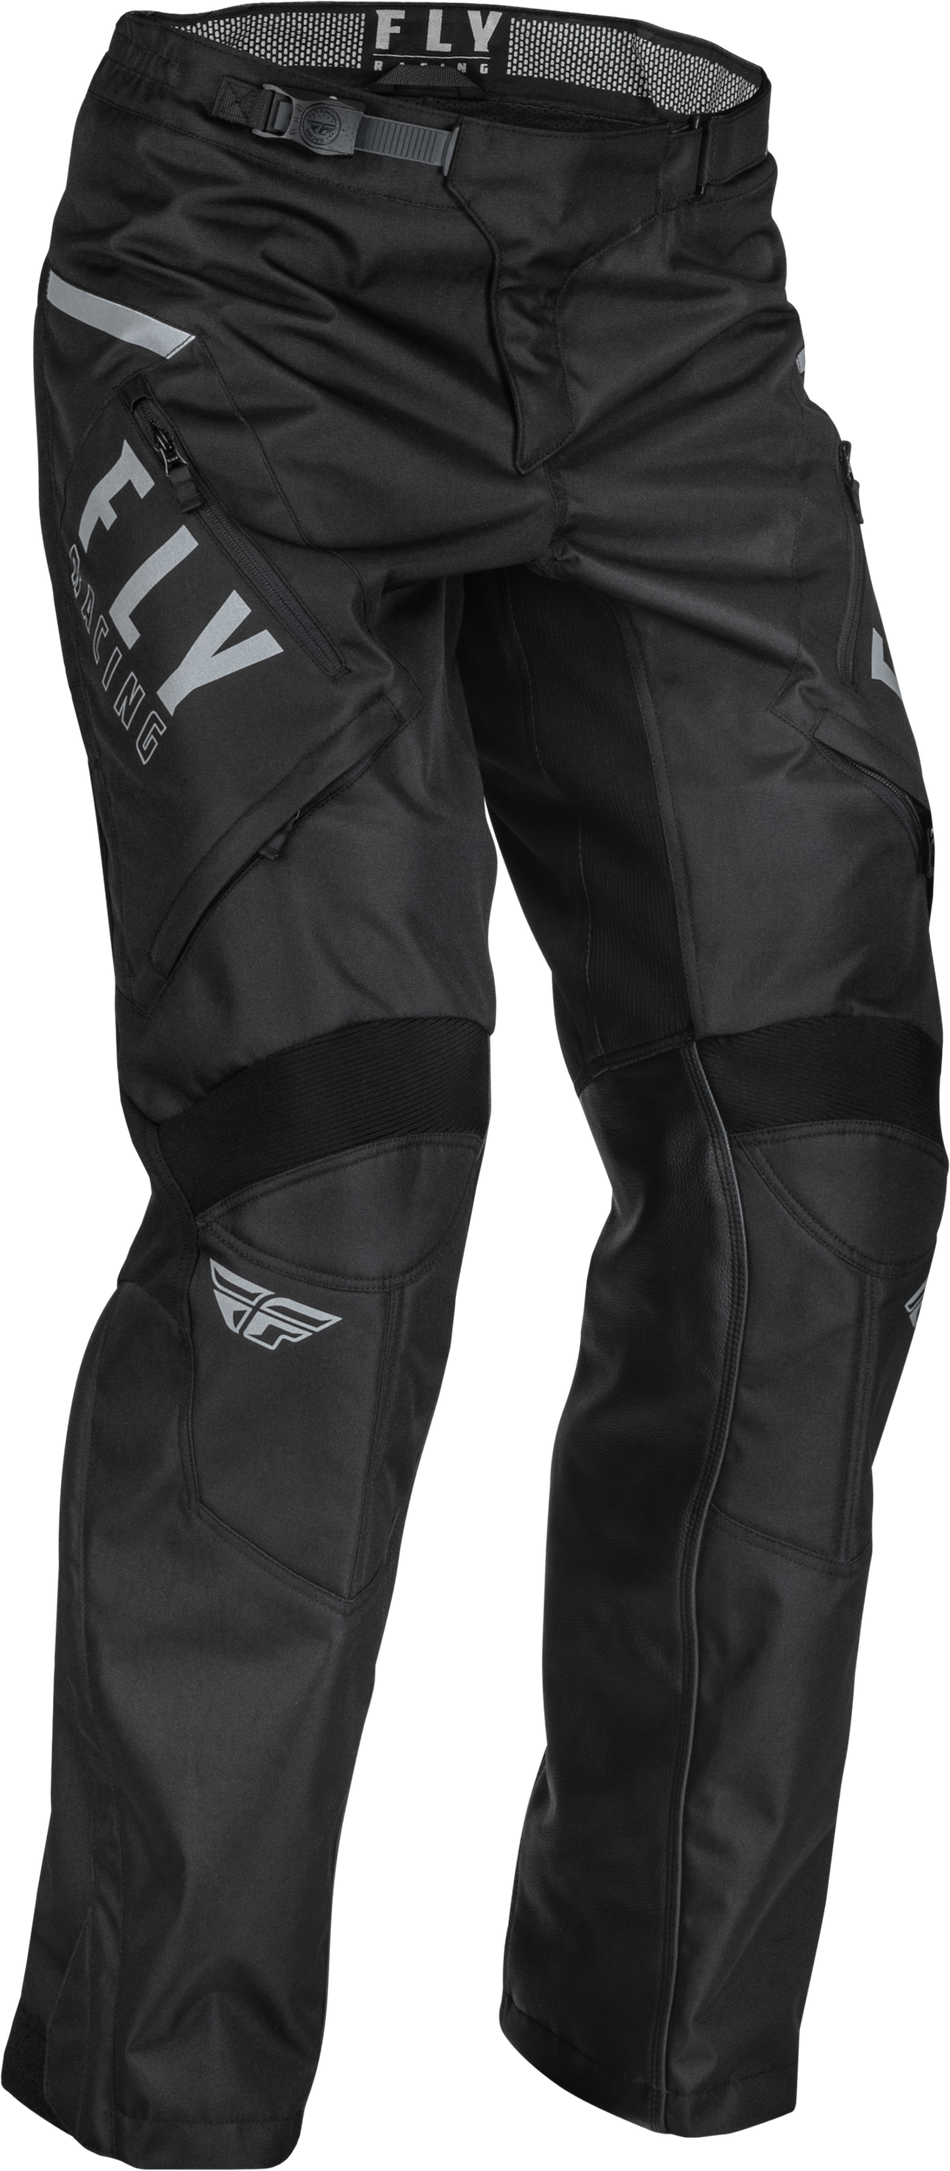 FLY RACING Patrol Over-Boot Pants Black/White Sz 38 376-64038